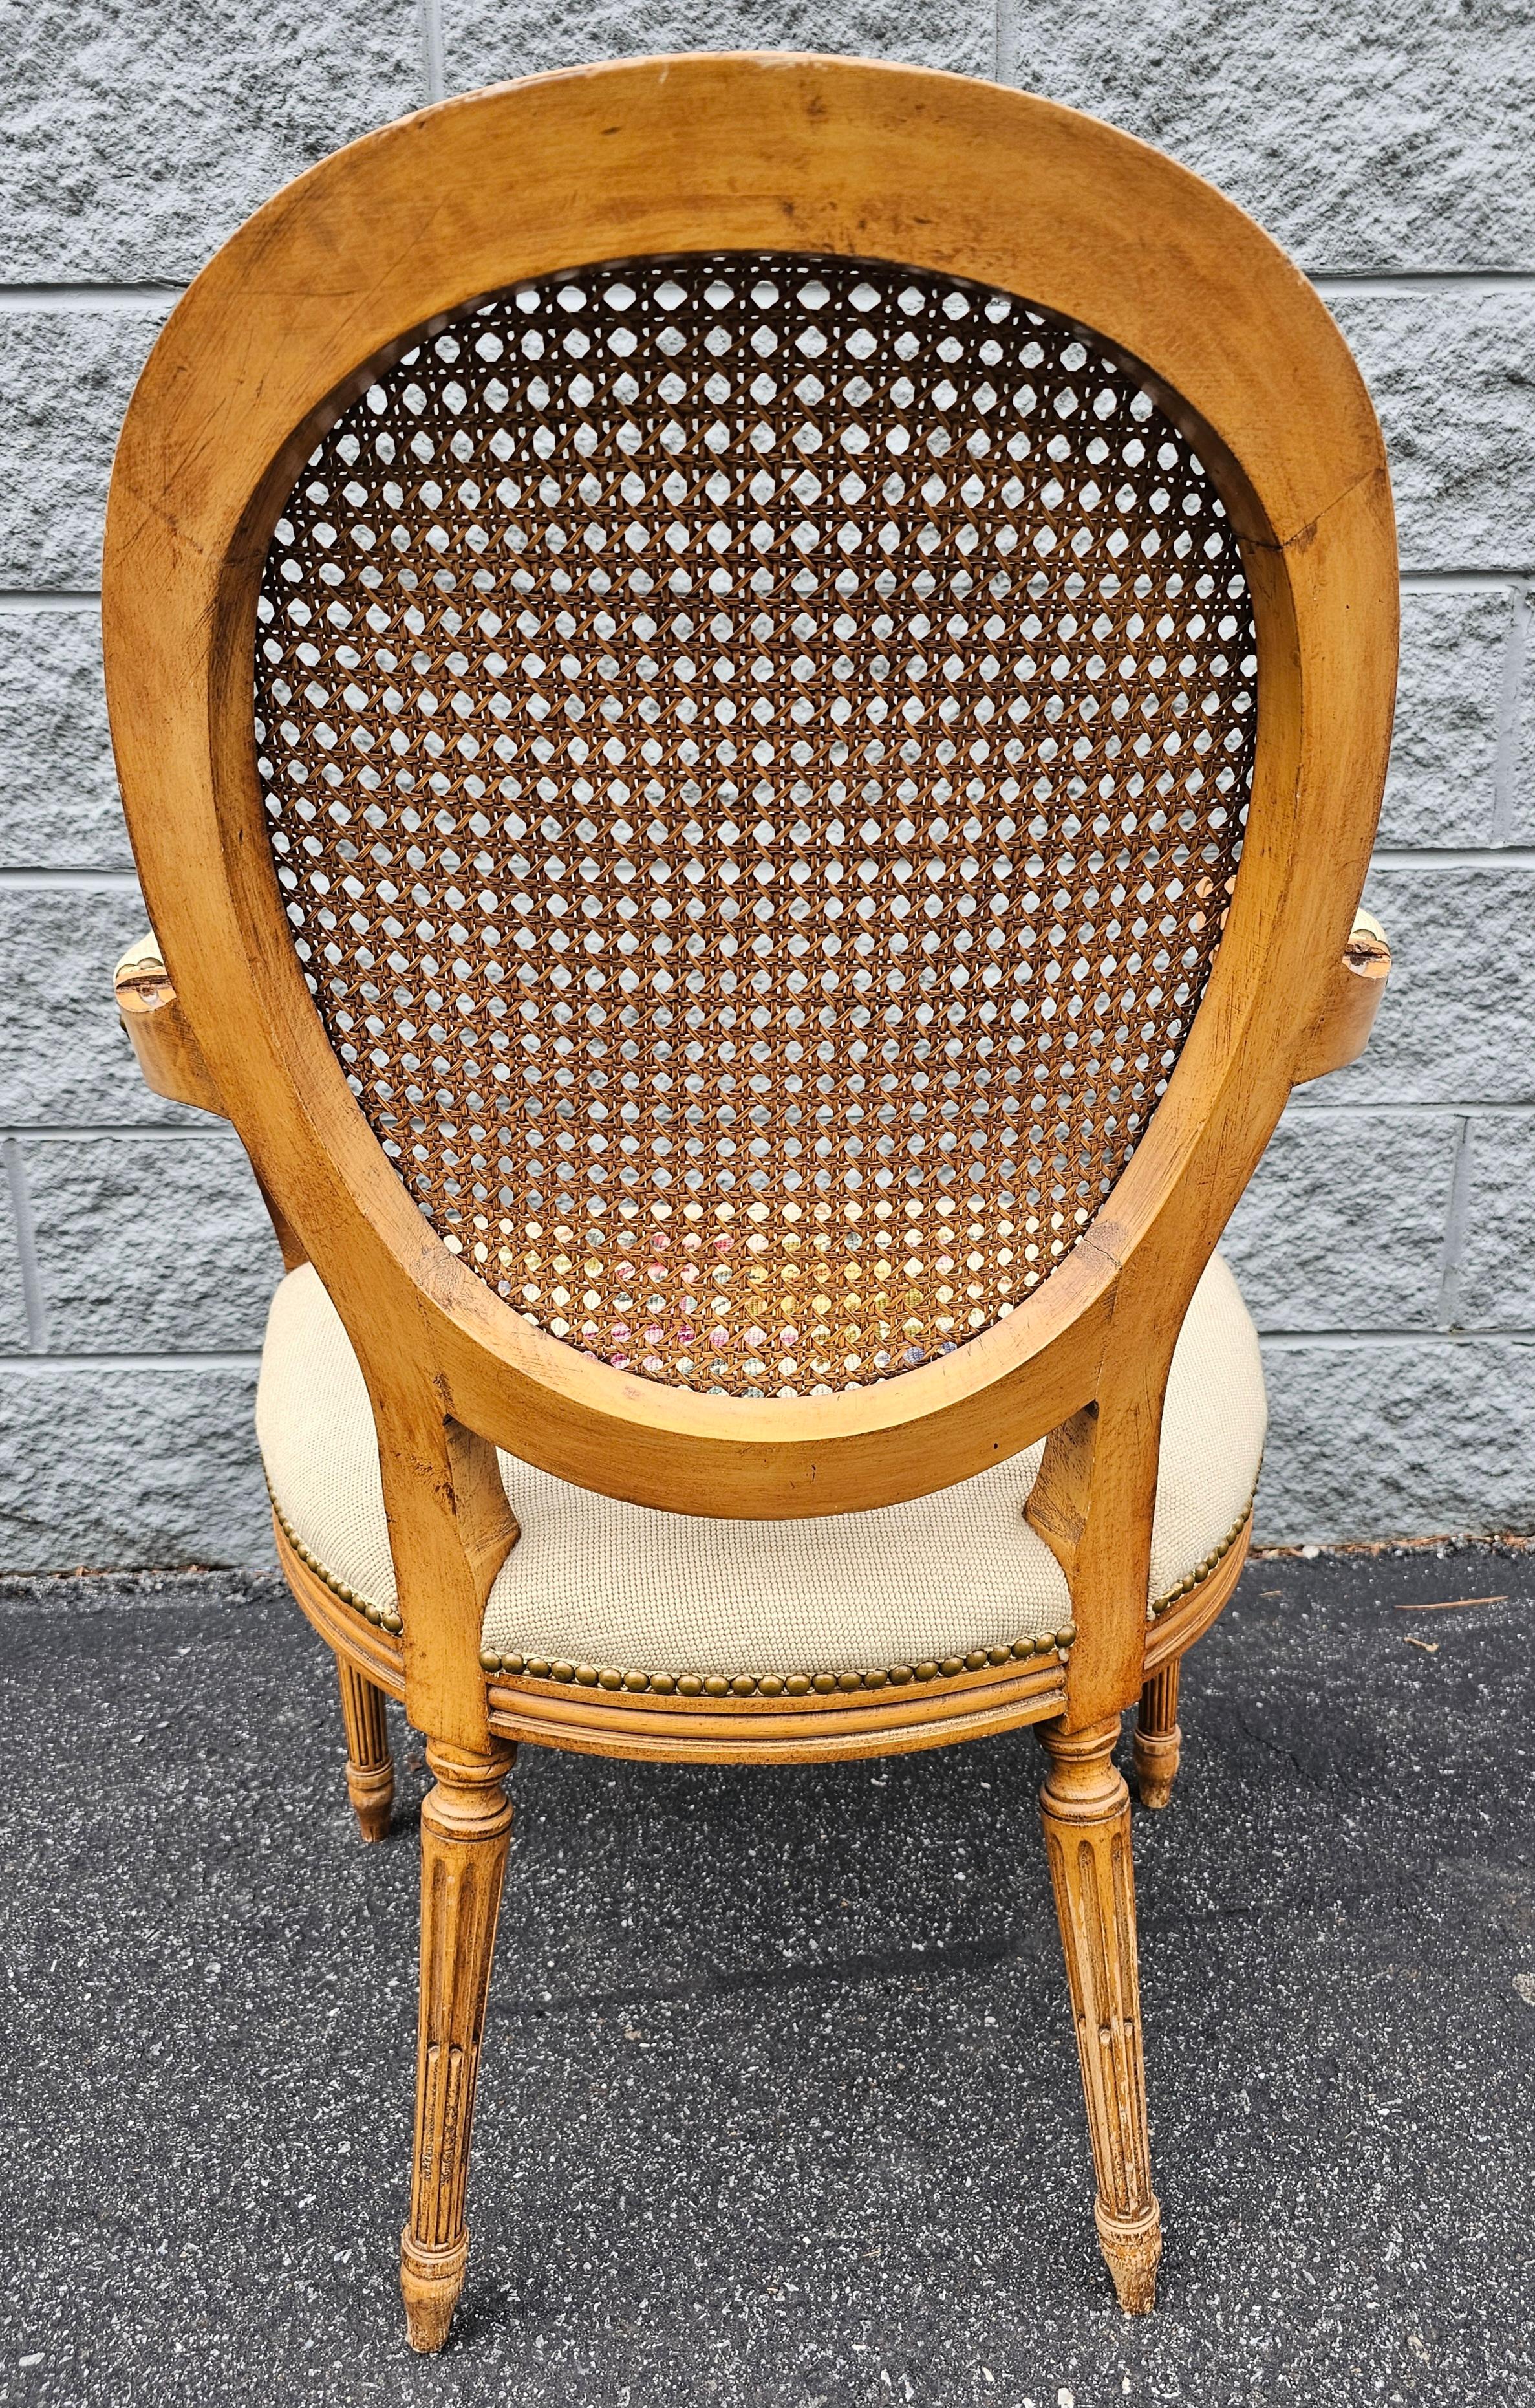 Louis XVI Style Fruitwood, Needlepoint Upholstered Seat And Caned Back Fauteuil For Sale 3